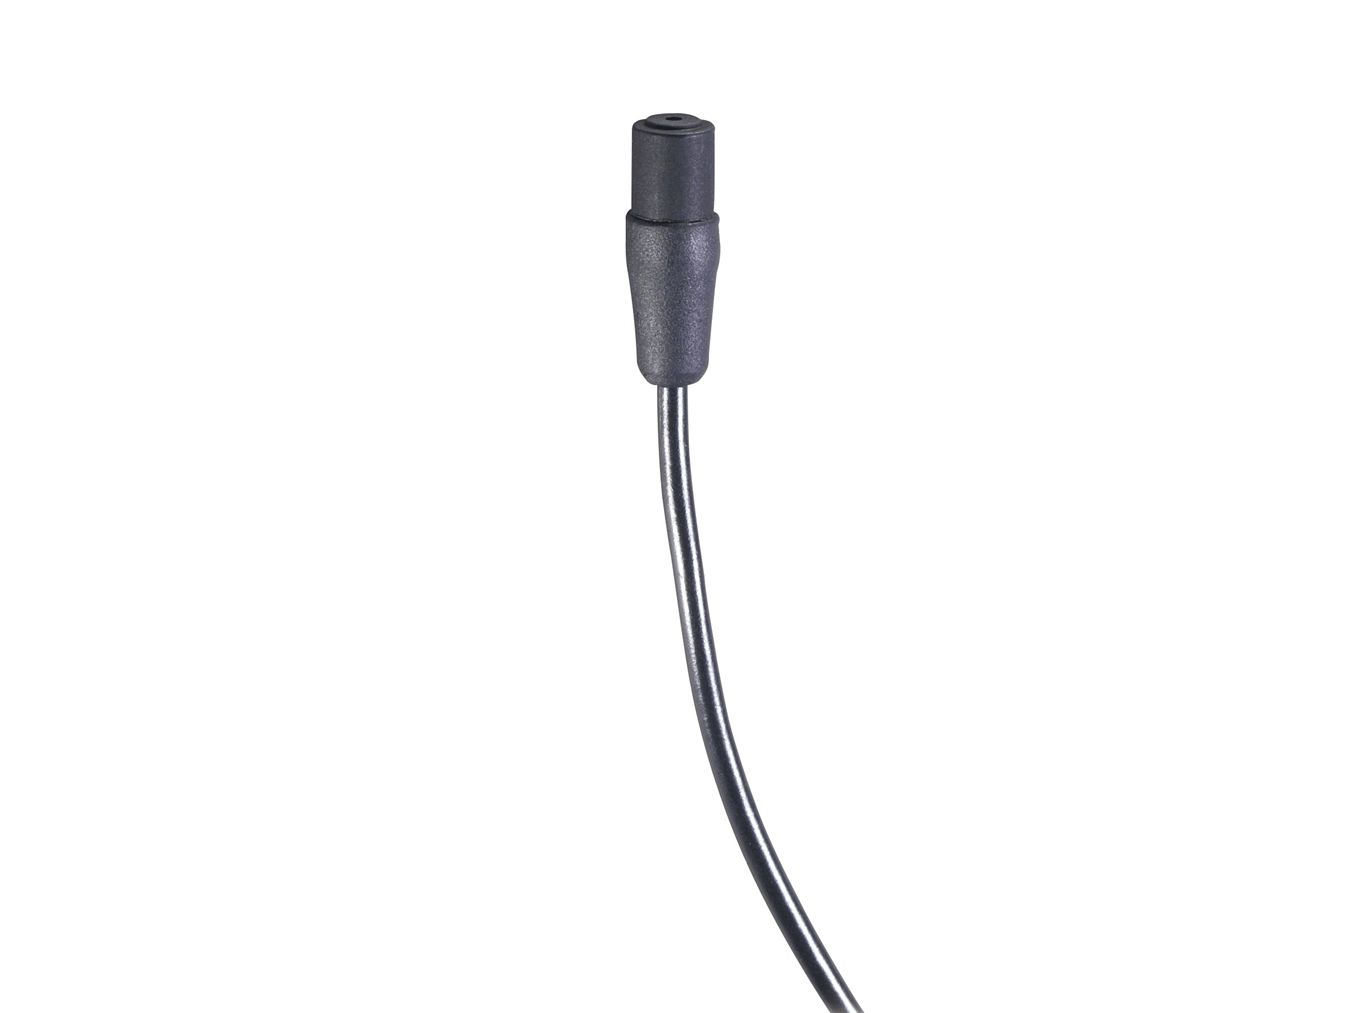 5mm AT899 lavalier microphone